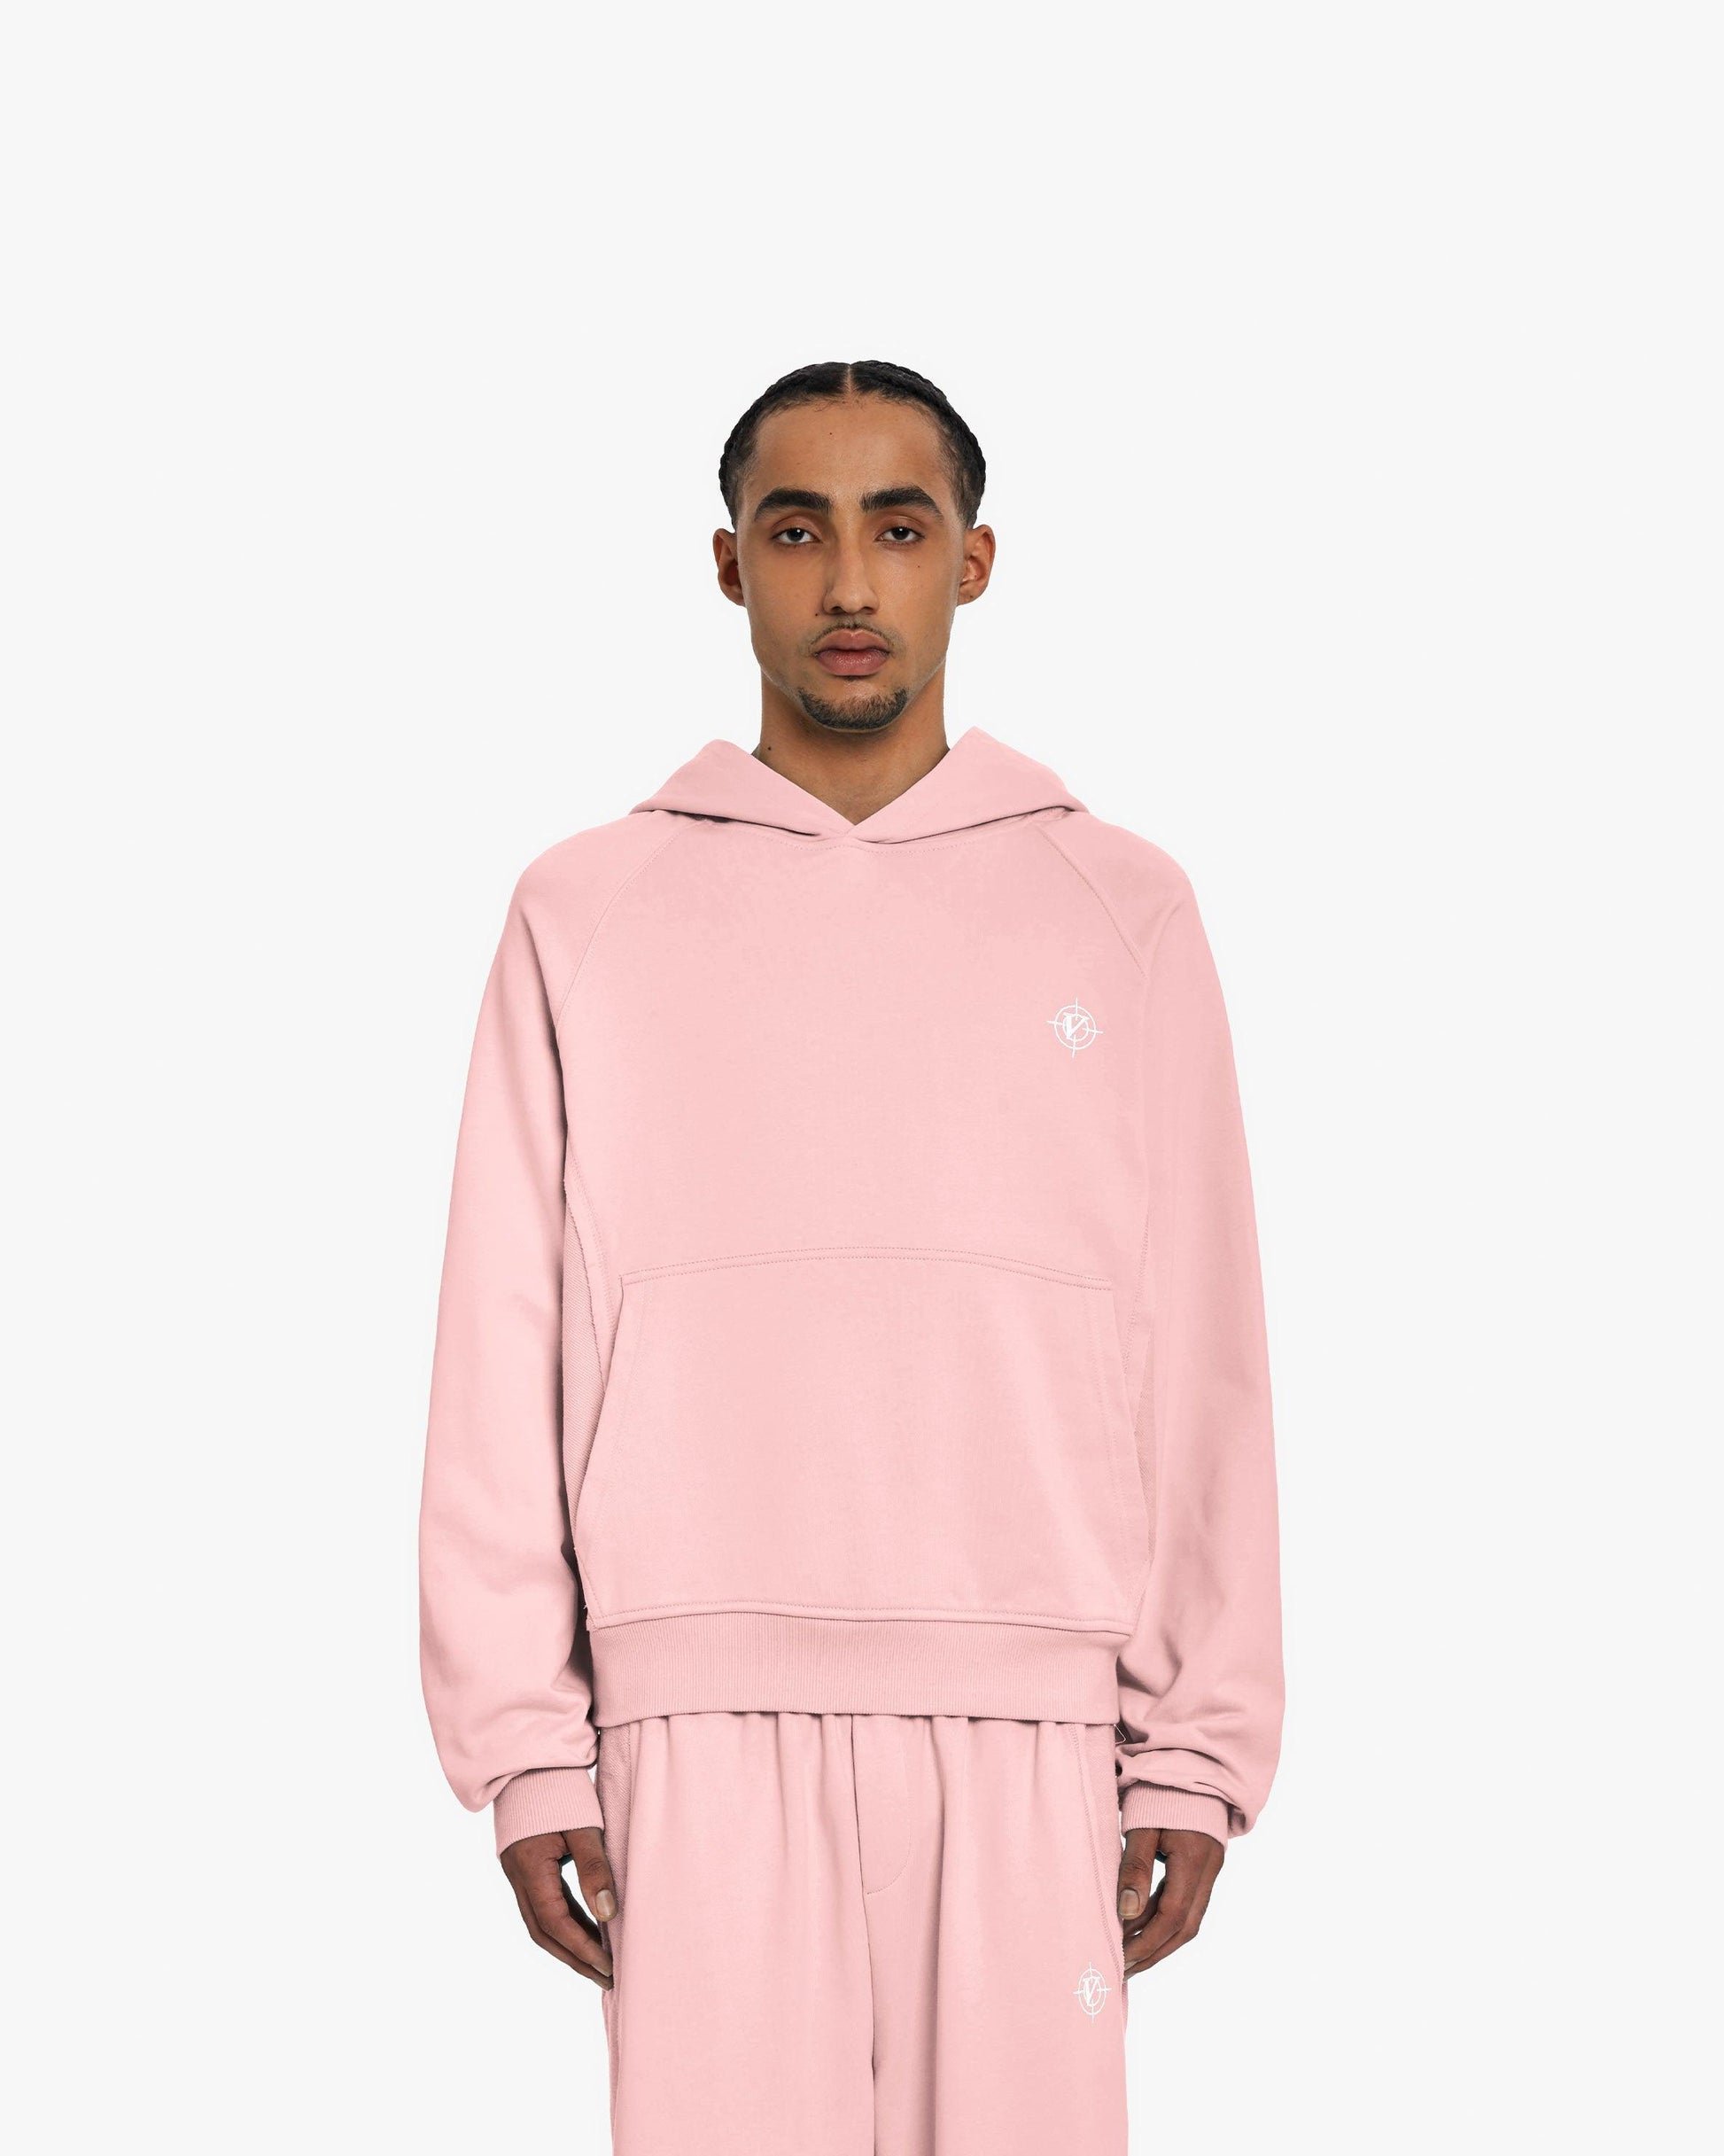 INSIDE OUT HOODIE PINK - VICINITY